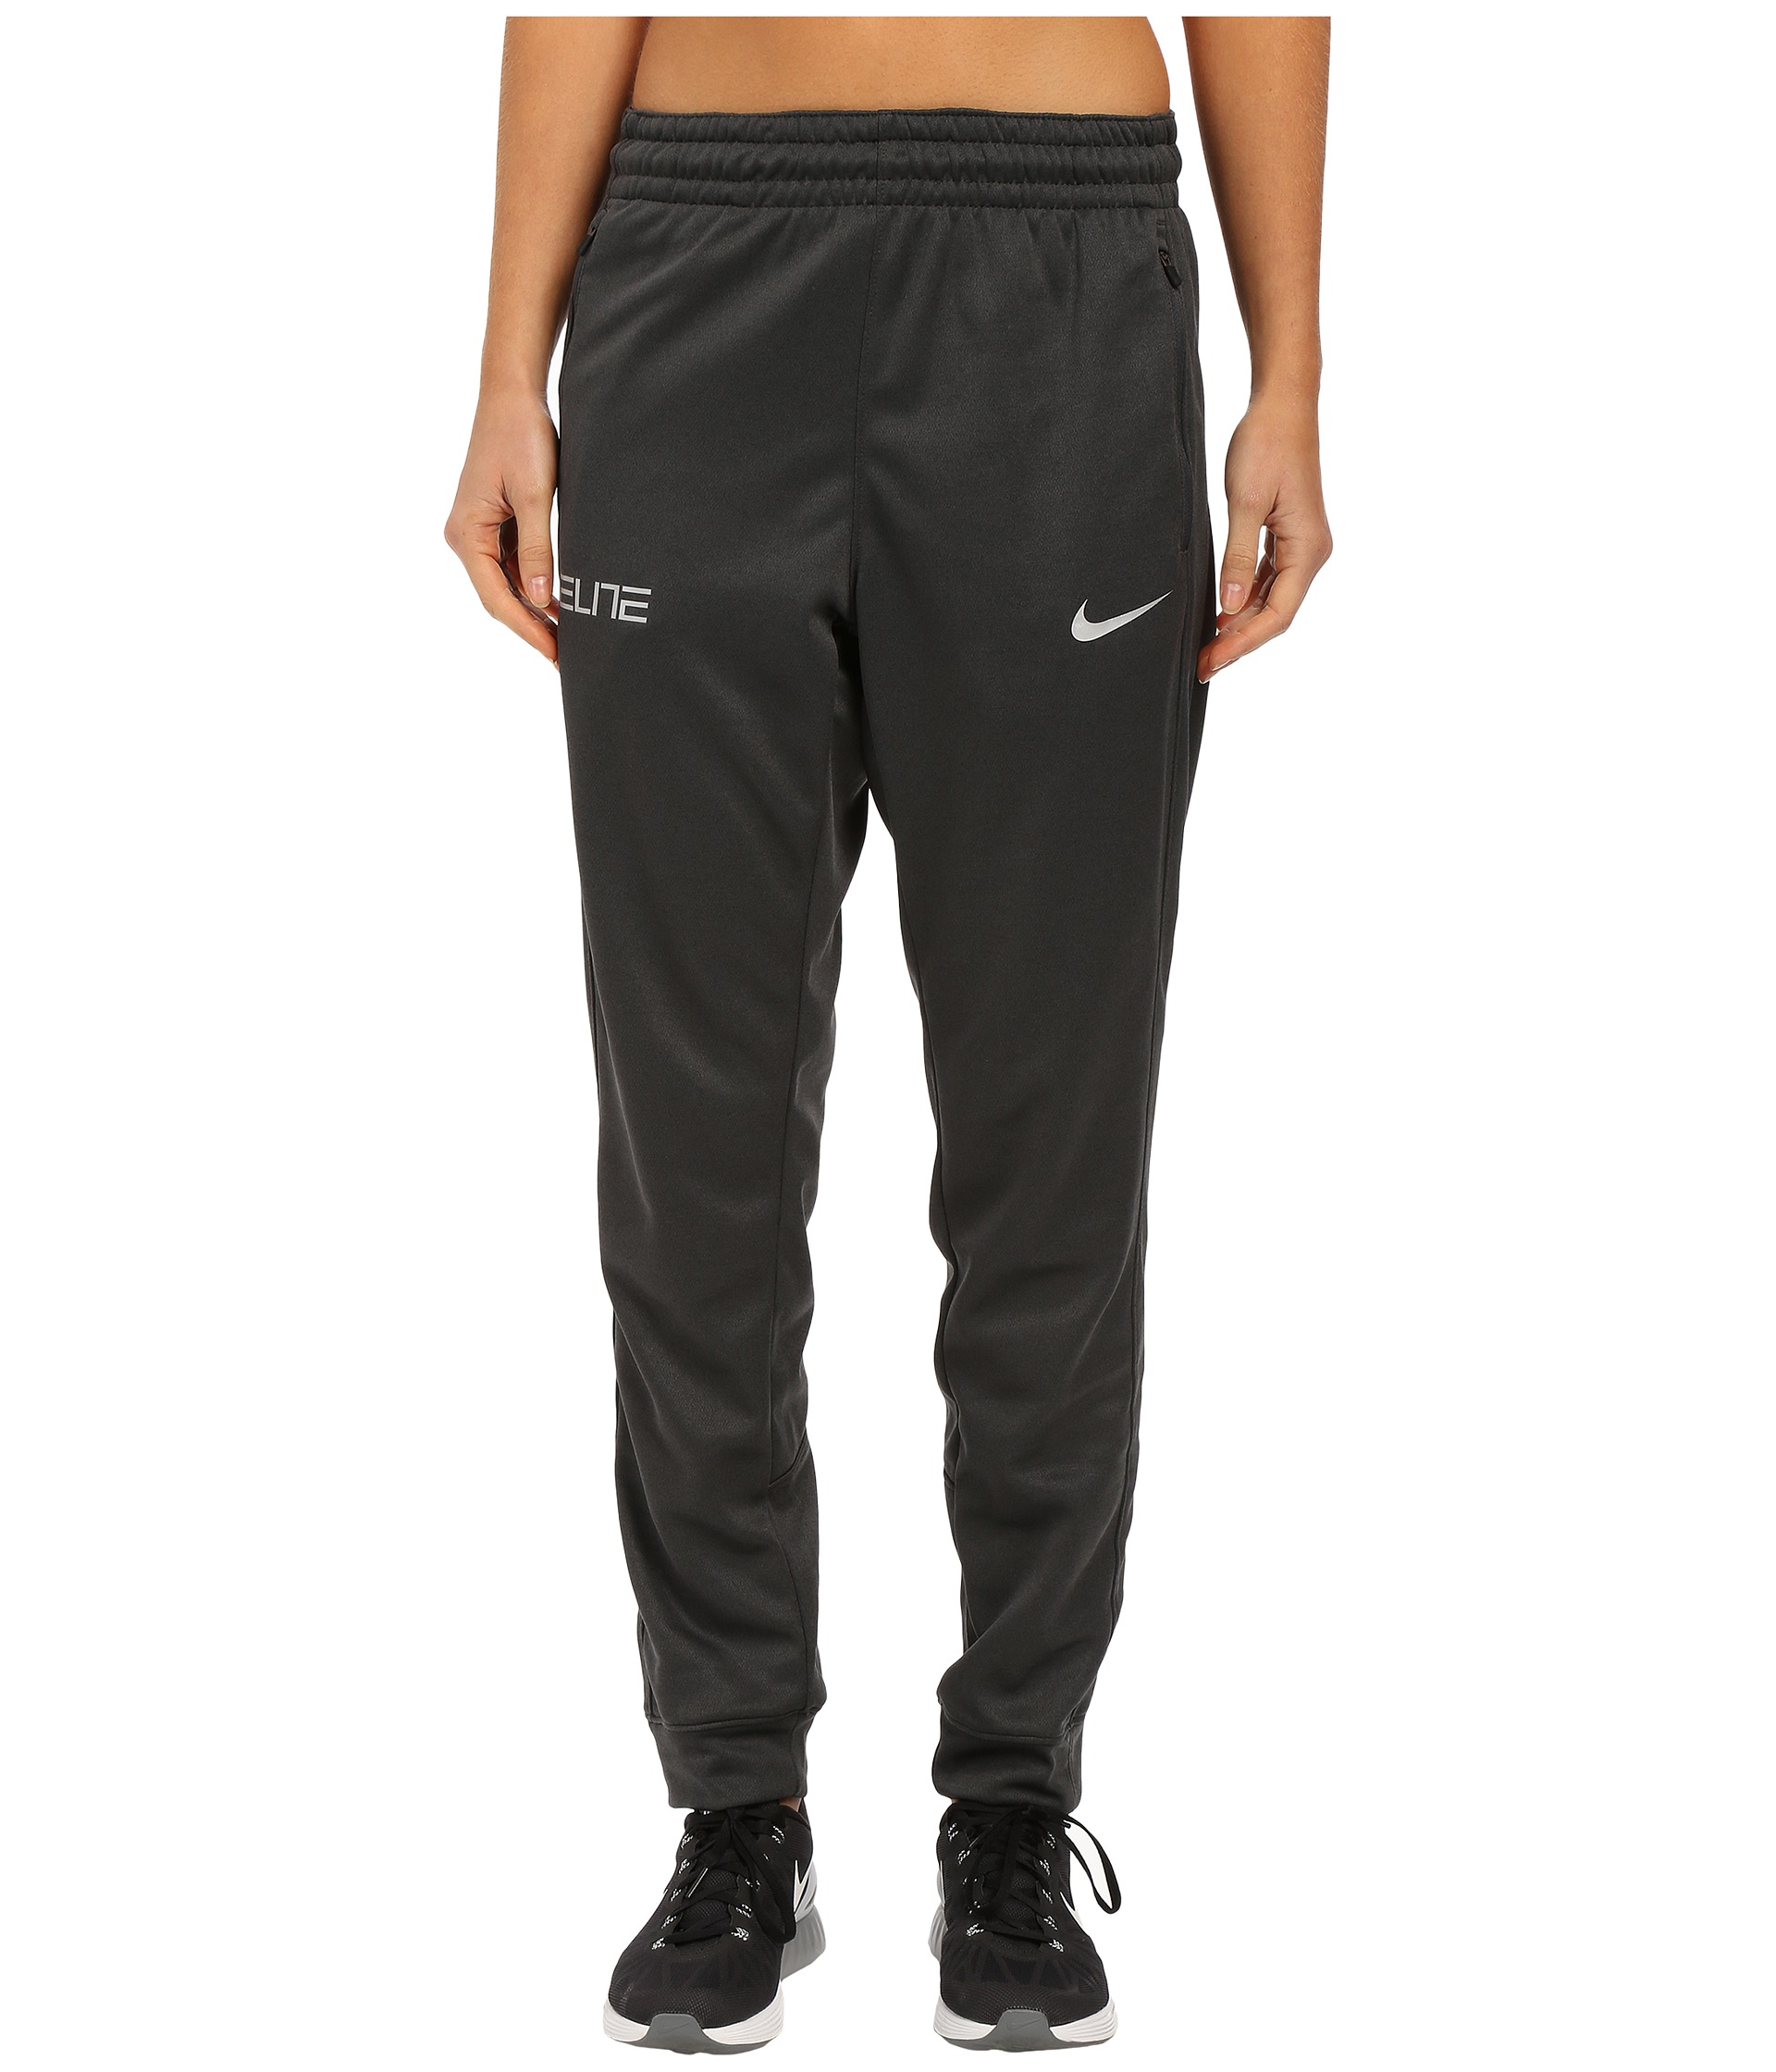 Nike Elite Cuff Pants in Anthracite/Metallic Silver (Gray) for Men - Lyst